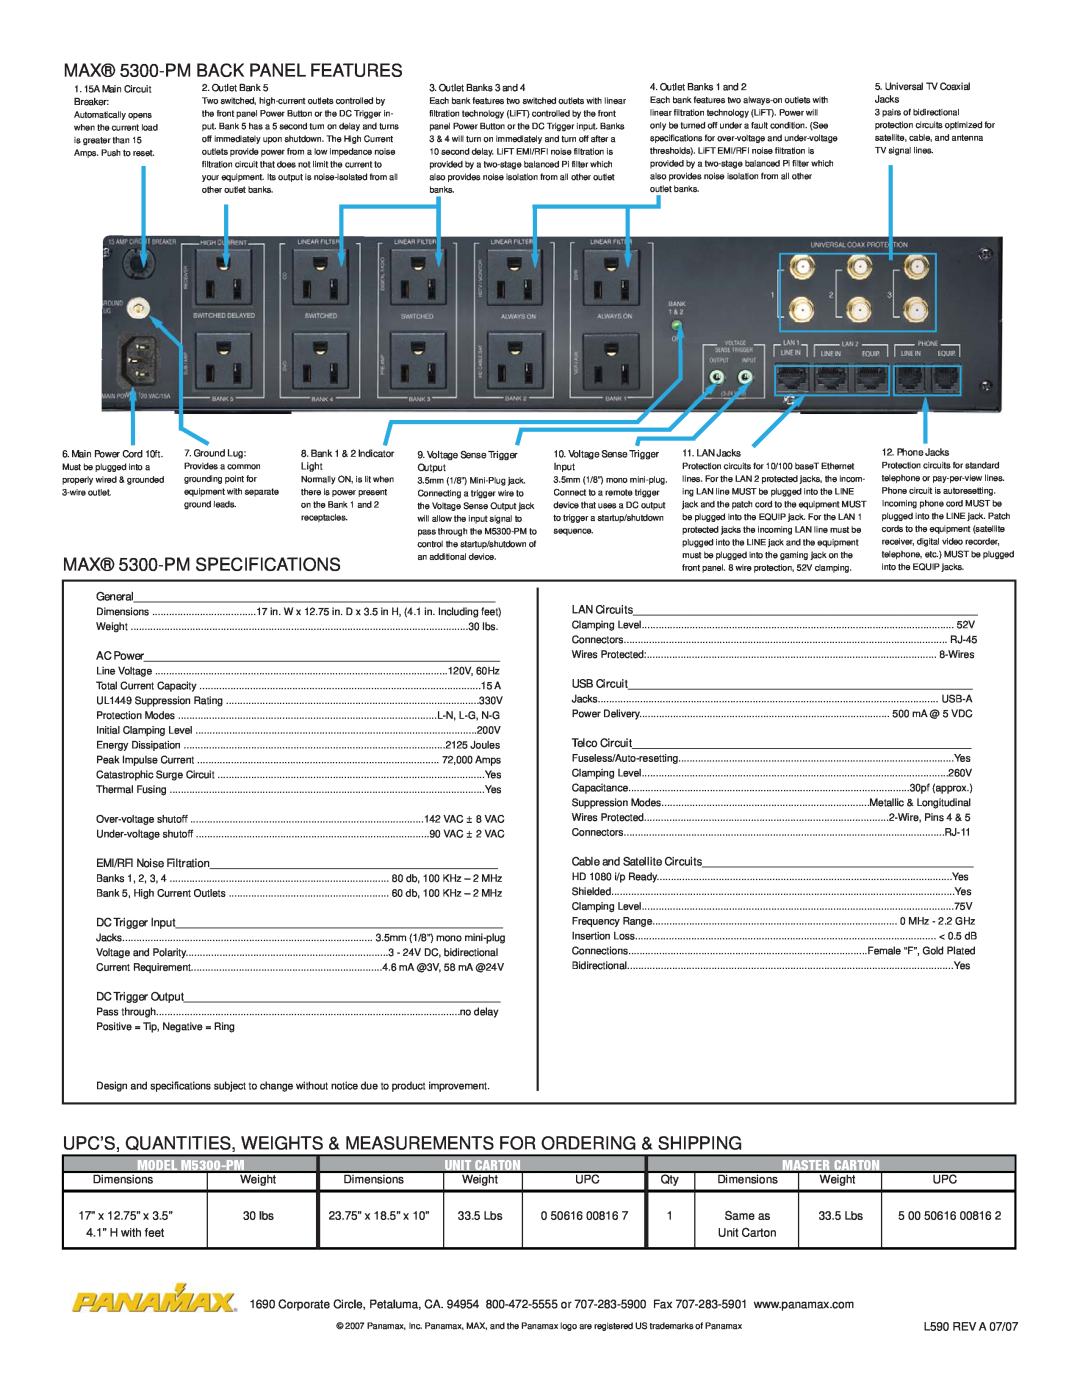 Panamax manual MAX 5300-PMBACK PANEL FEATURES, MAX 5300-PMSPECIFICATIONS, MODEL M5300-PM, Same as, 4.1” H with feet 